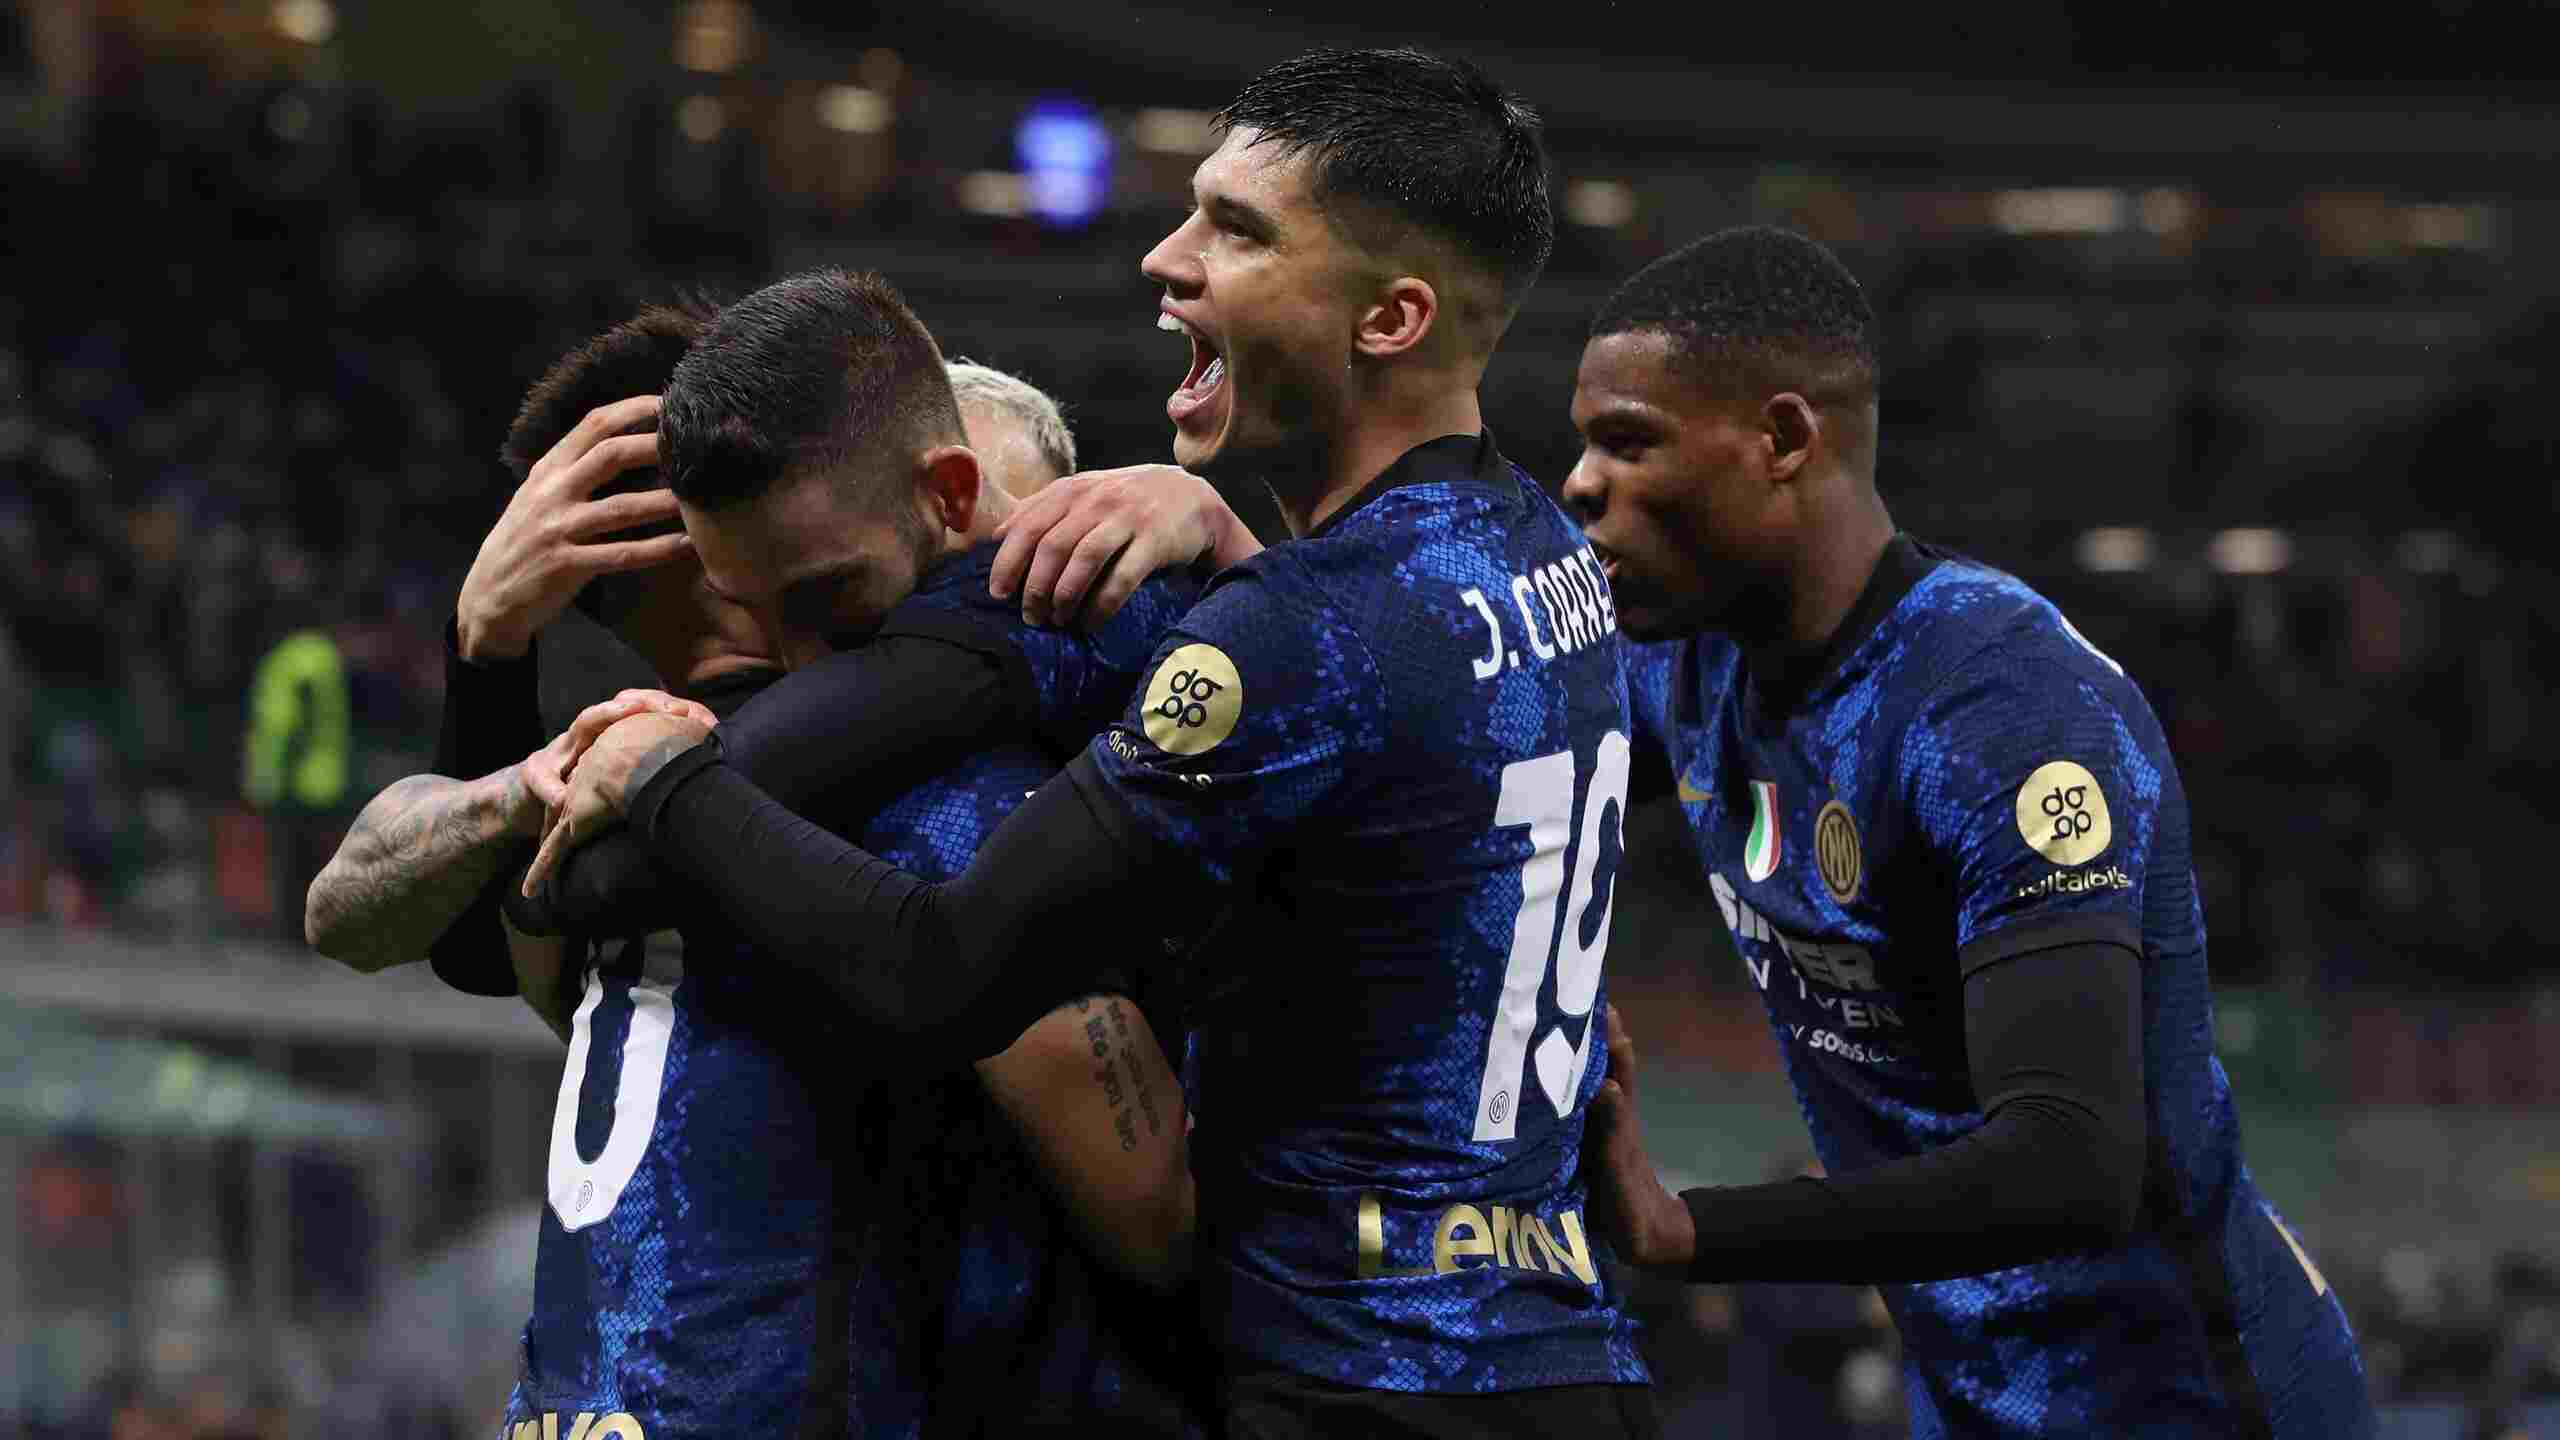 Inter Milan vs AS Roma LIVE in Serie A: INT vs ROM Live Streaming Details In India and Other Countries